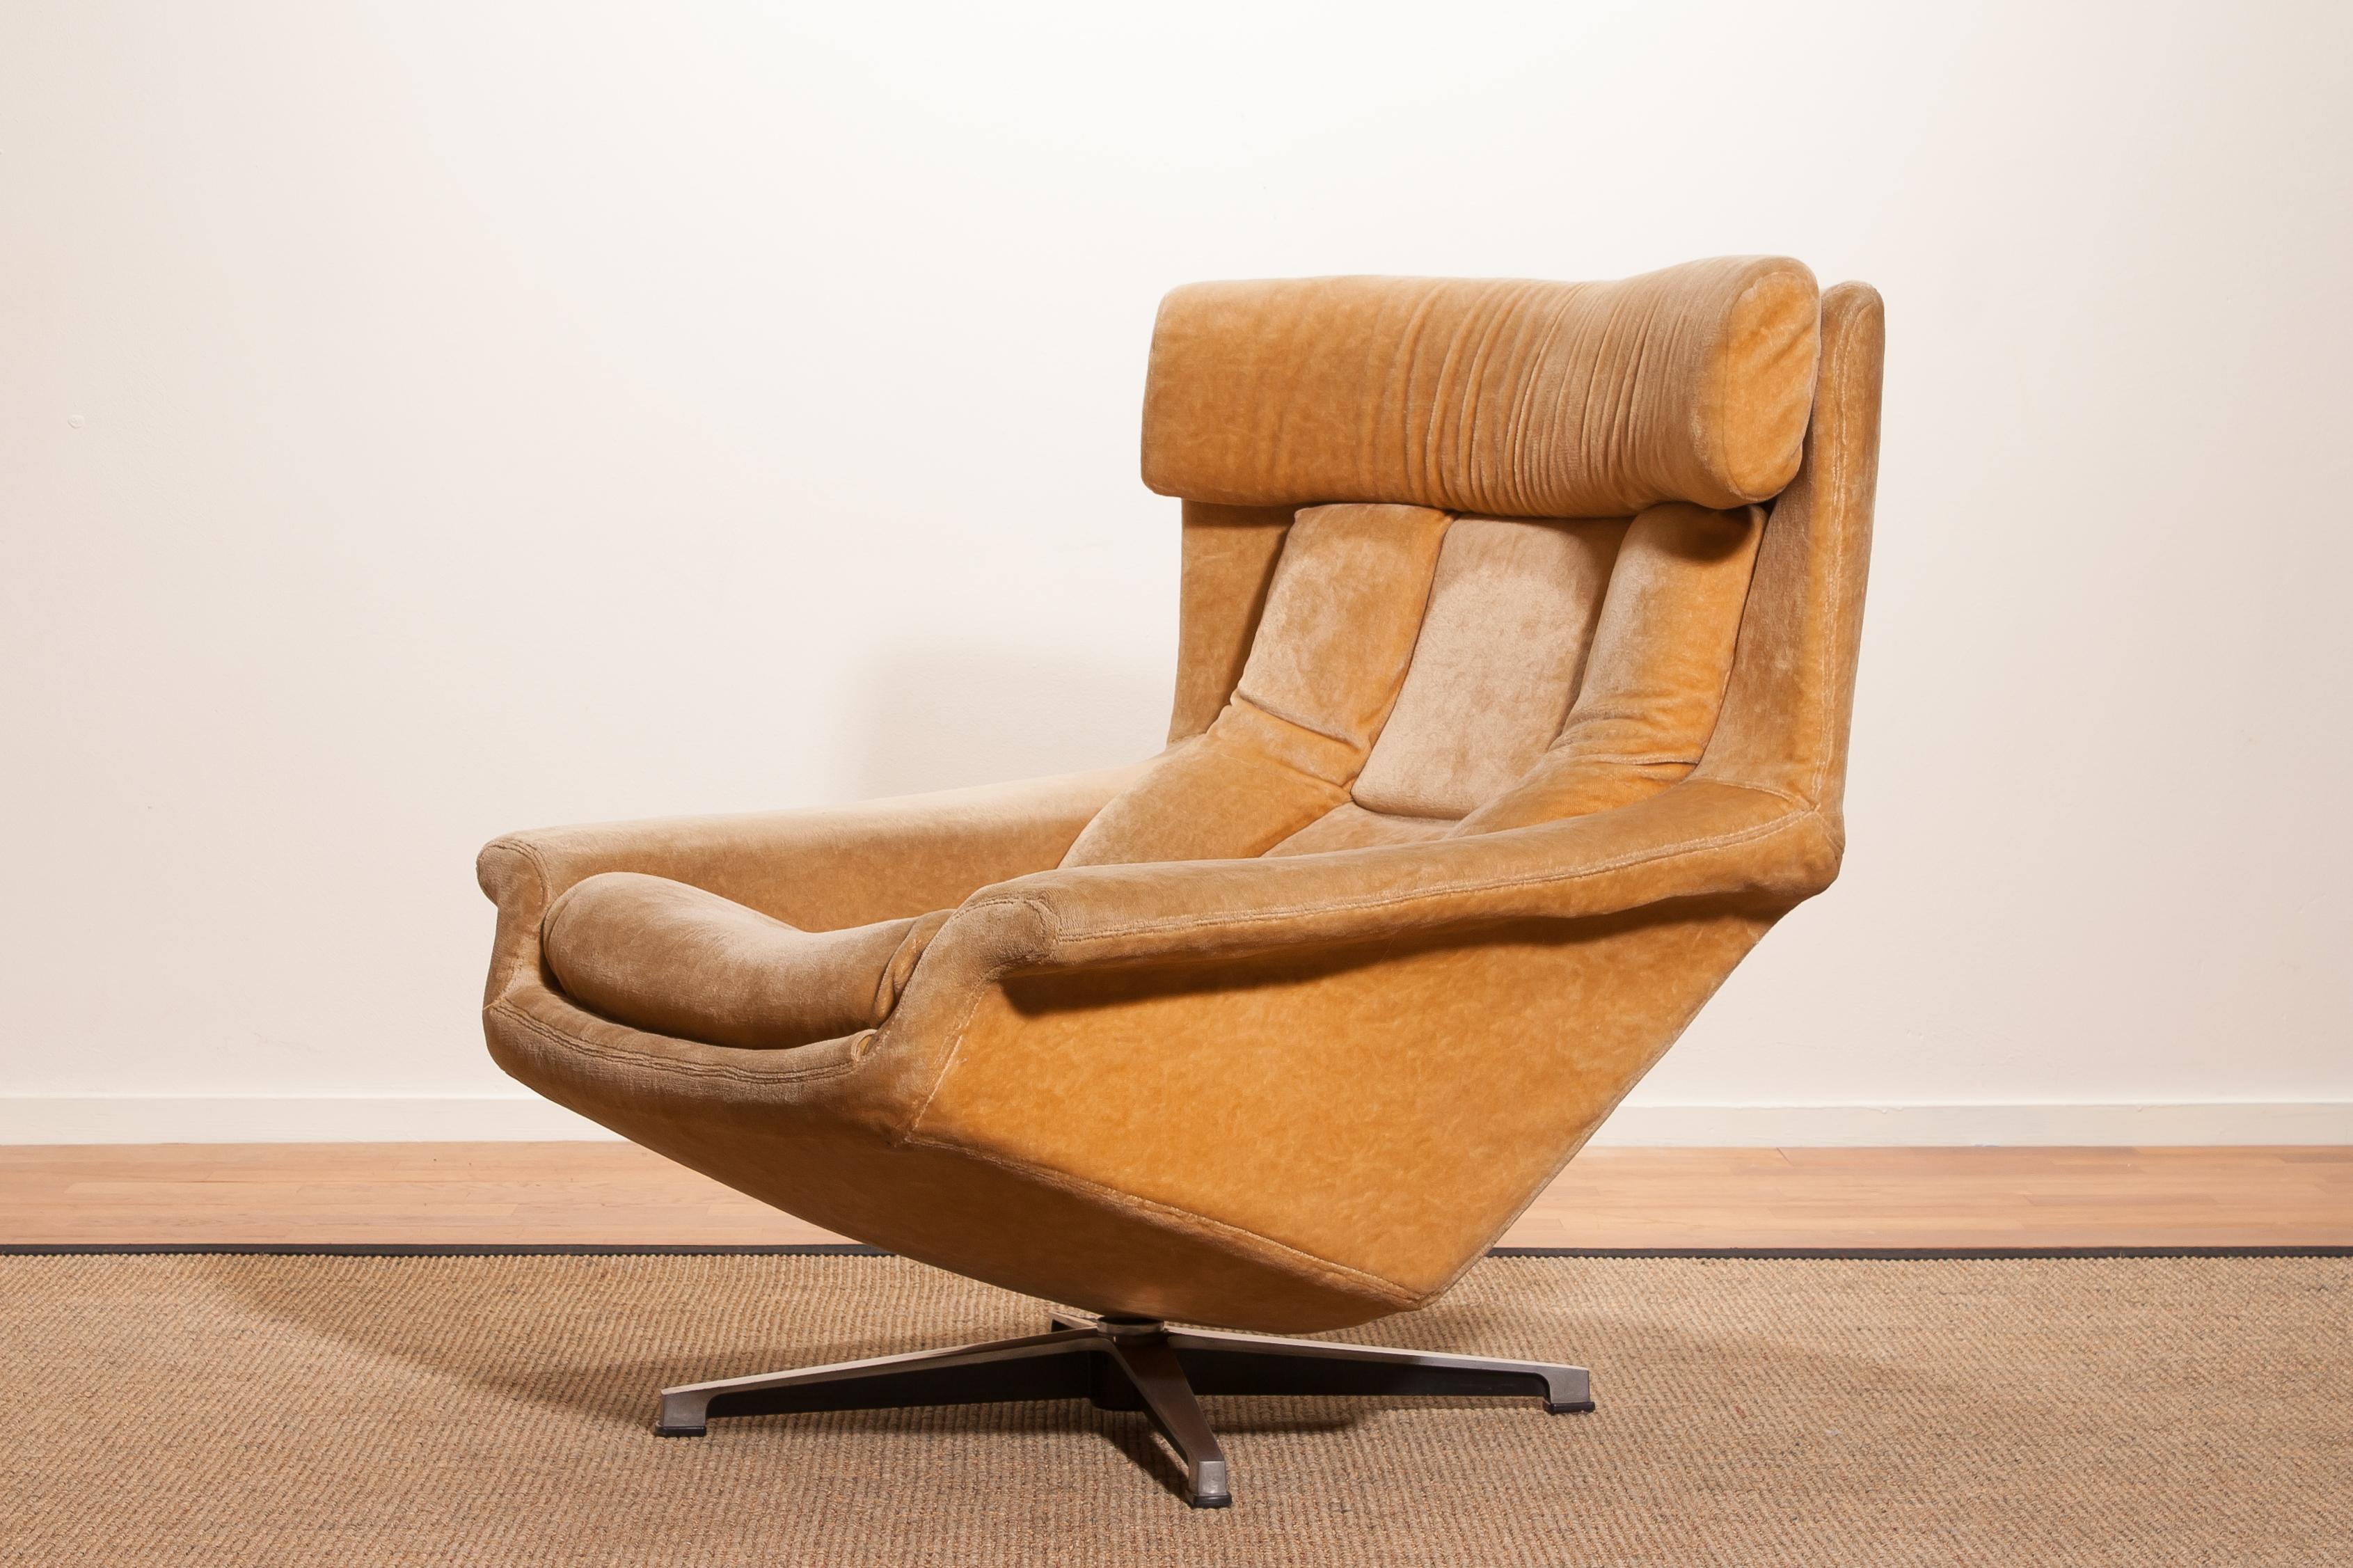 Nice, in original condition, swivel lounge chair made by Bra Bohag AB Sweden.
The seating is upholstered with a golden or beige velvet on a chromed swivel stand.
Period 1960s.
Dimensions: H 85 cm, W 82 cm, D 80 cm, SH 38 cm.